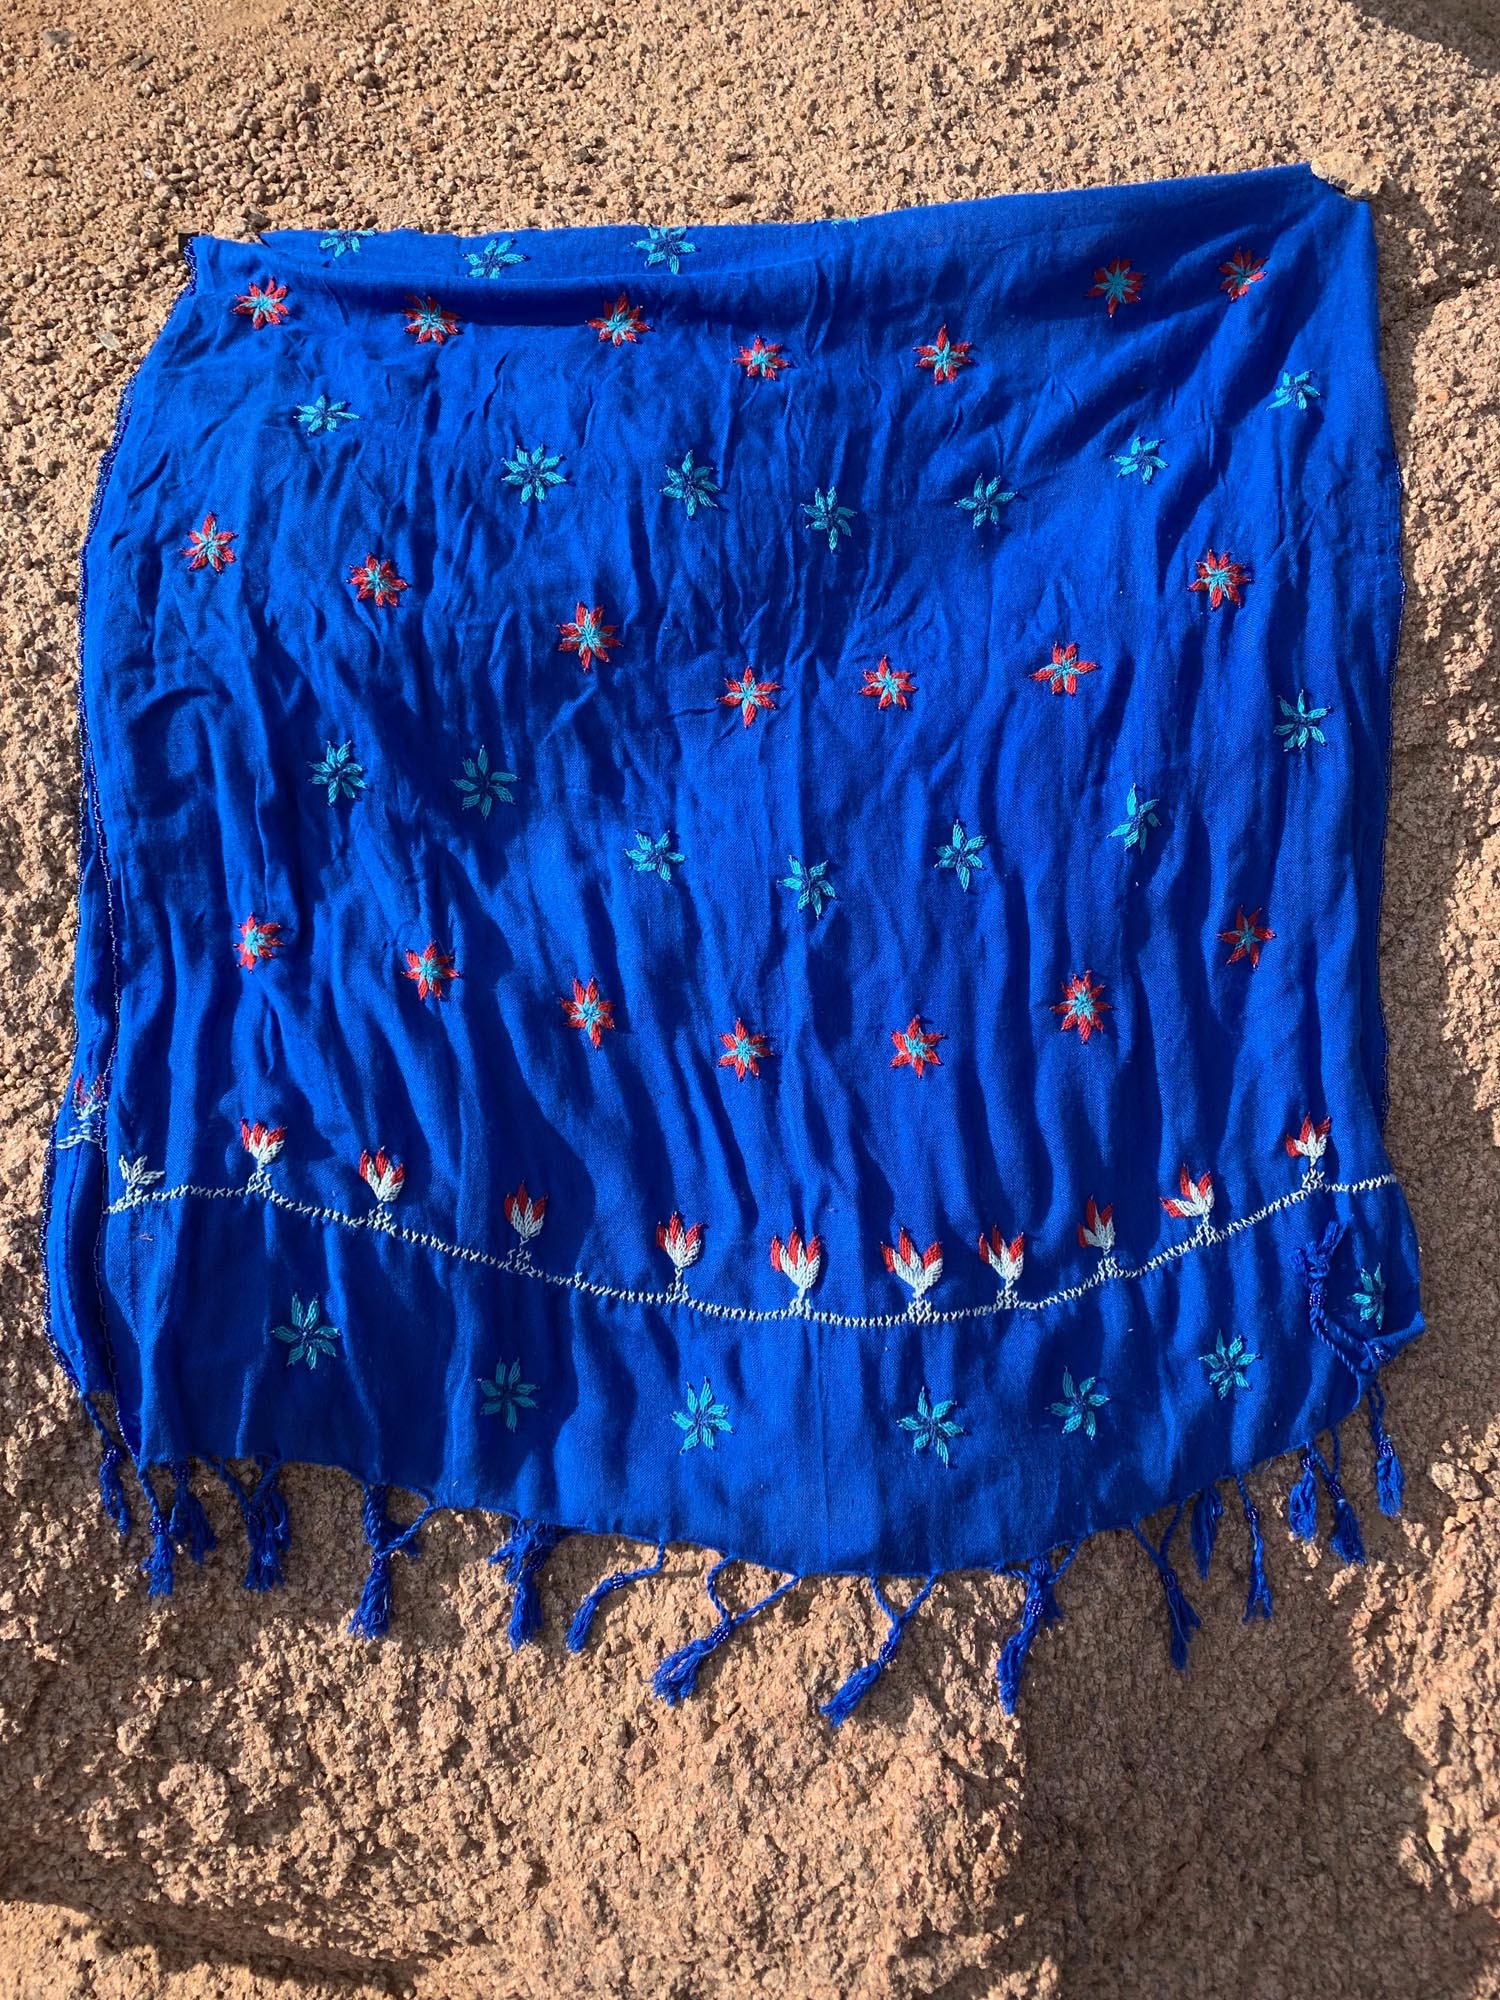 Scarves - Small & Large — Bedouin Craft, Handmade in South Sinai